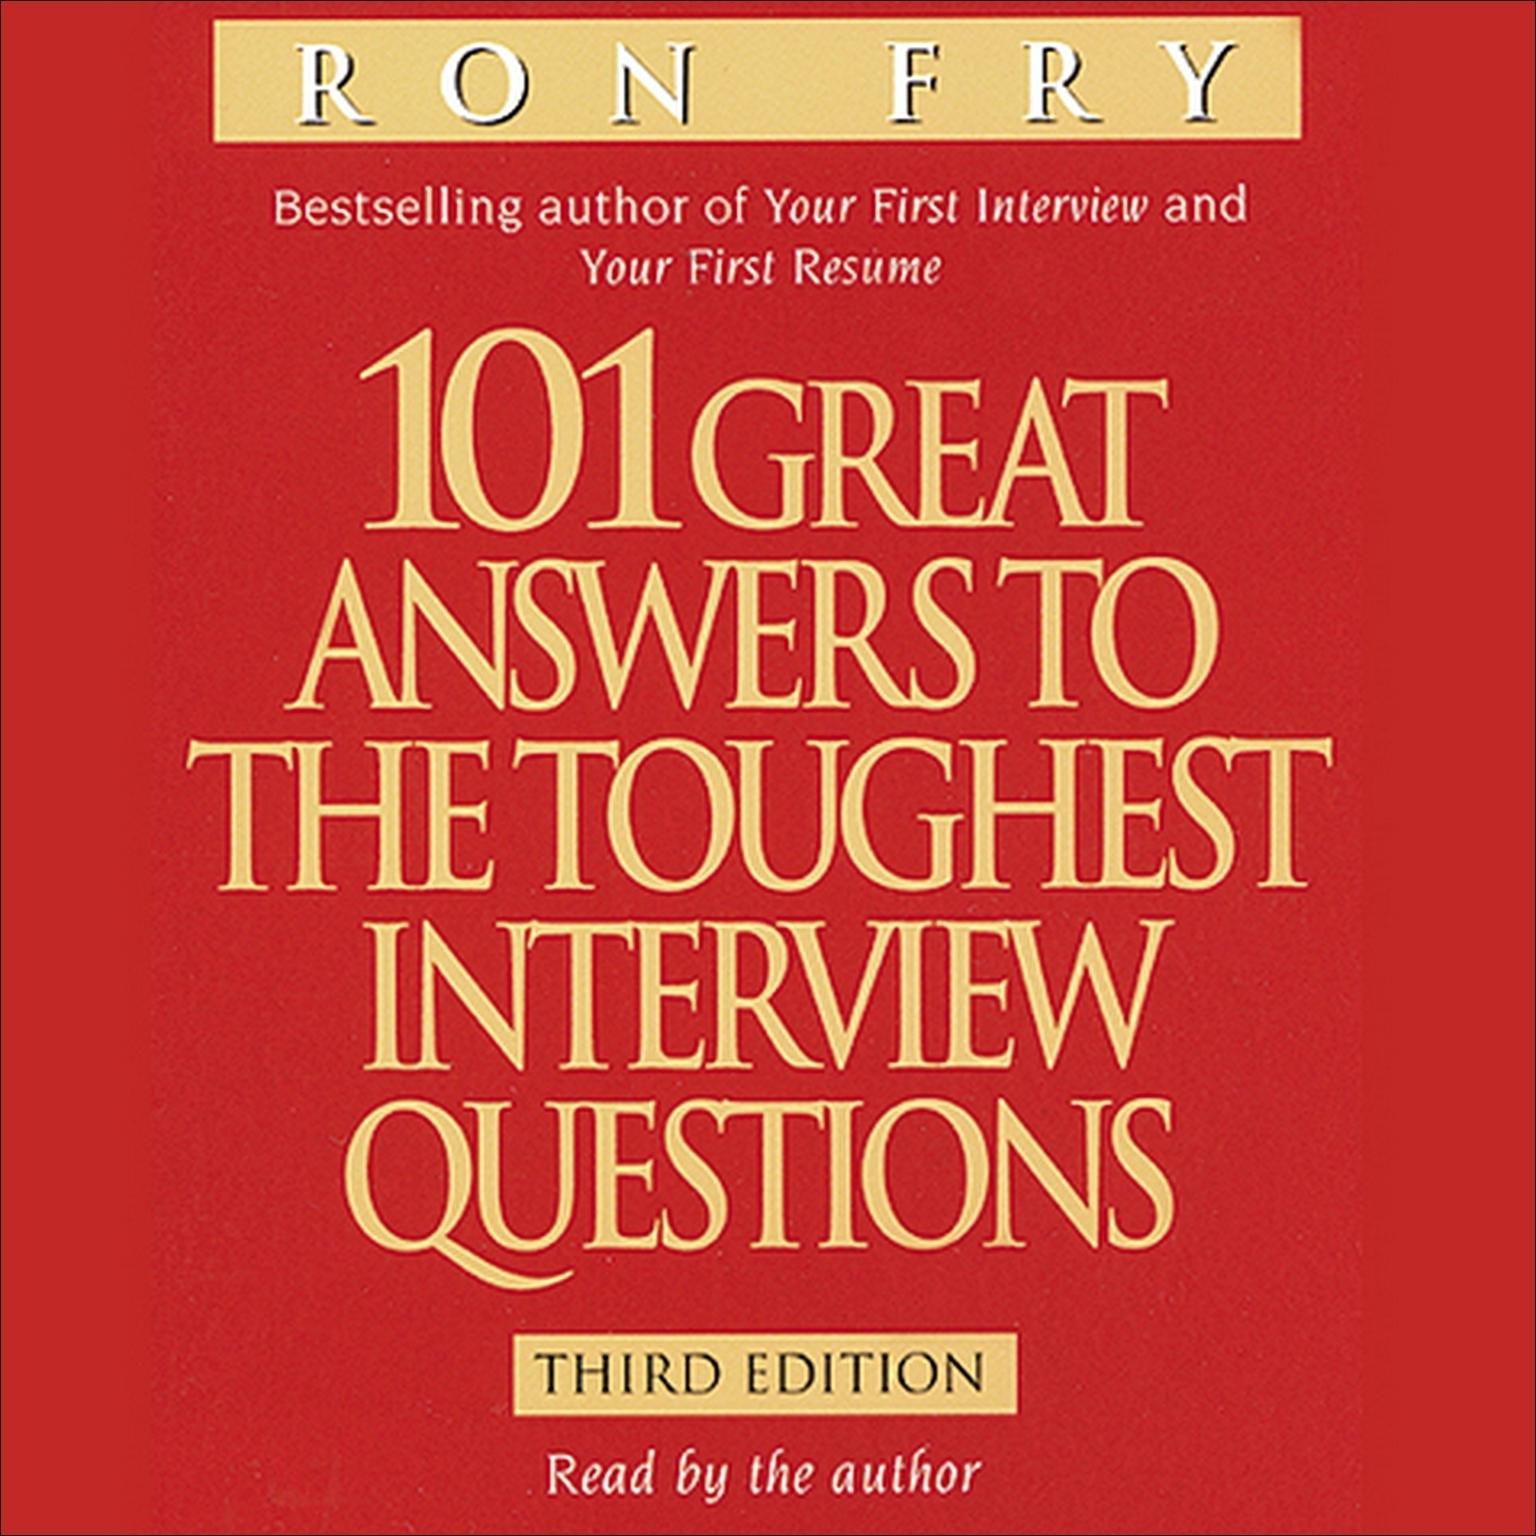 101 Great Answers to the Toughest Interview Questions (Abridged) Audiobook, by Ron Fry